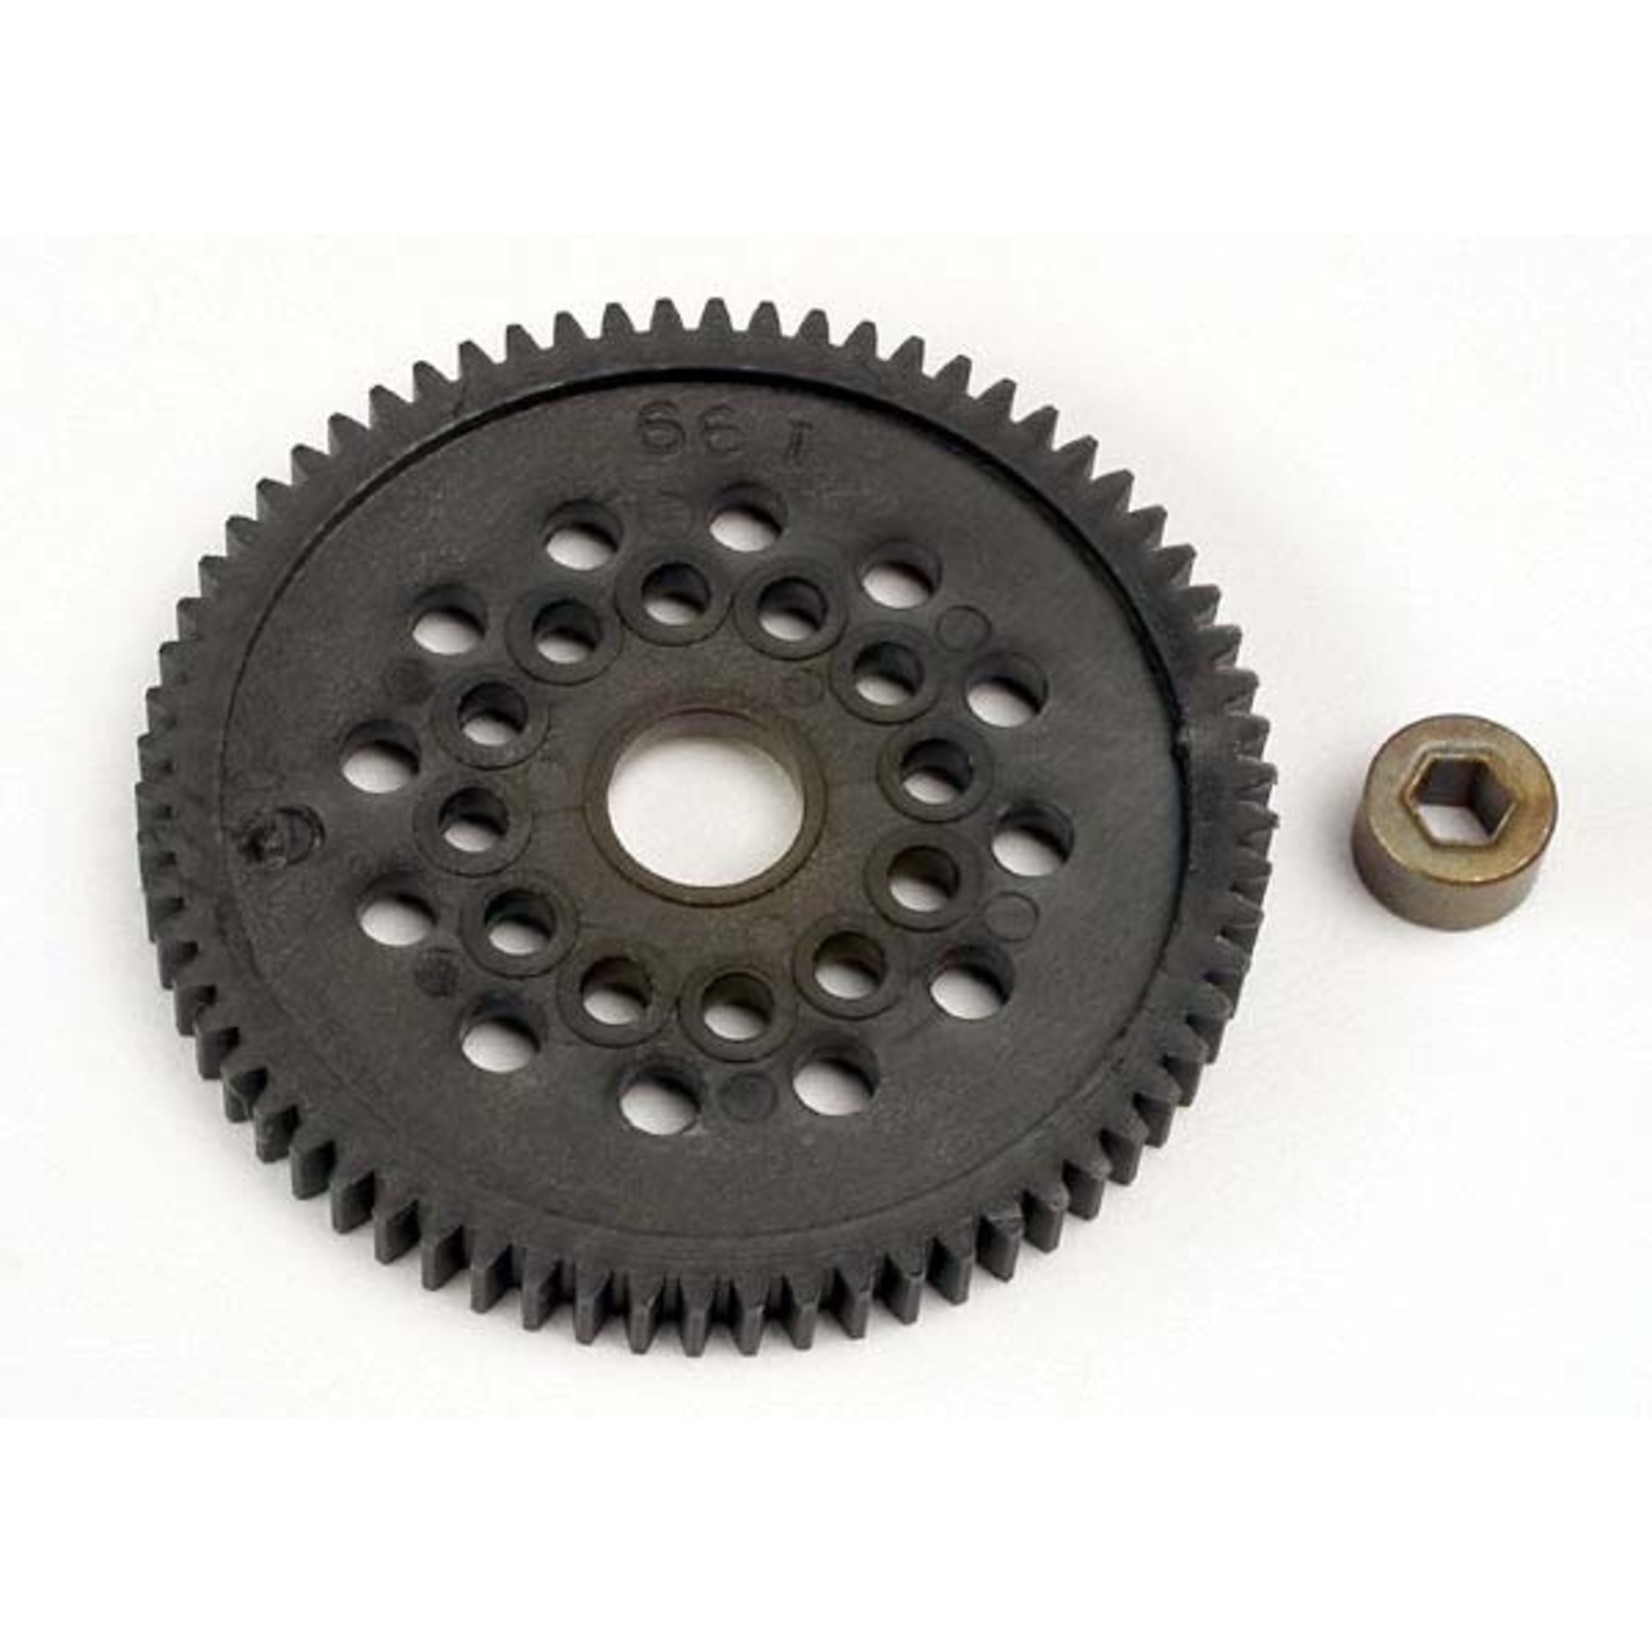 Traxxas 3166 - Spur gear (66-Tooth) (32-pitch) w/bushing